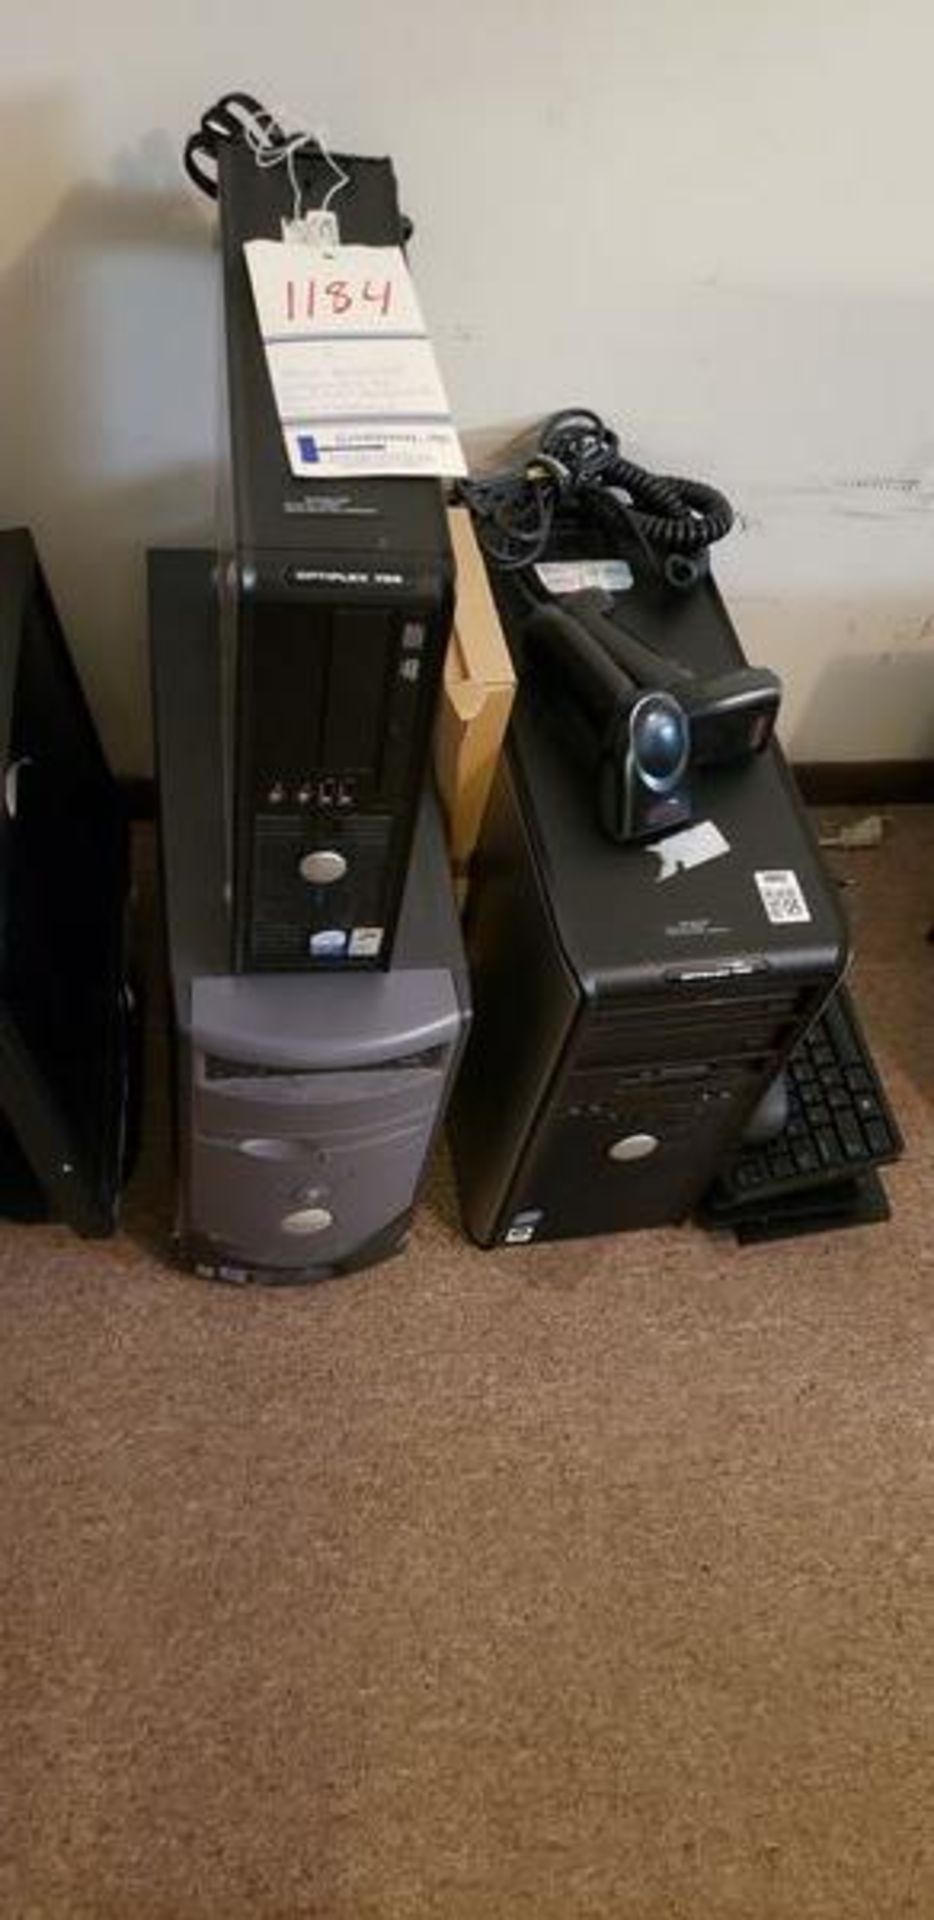 3 ASSORTED DESKTOP COMPUTERS WITH MONITORS, KEYBOARDS, MICE, AND SCANNER - Image 3 of 13